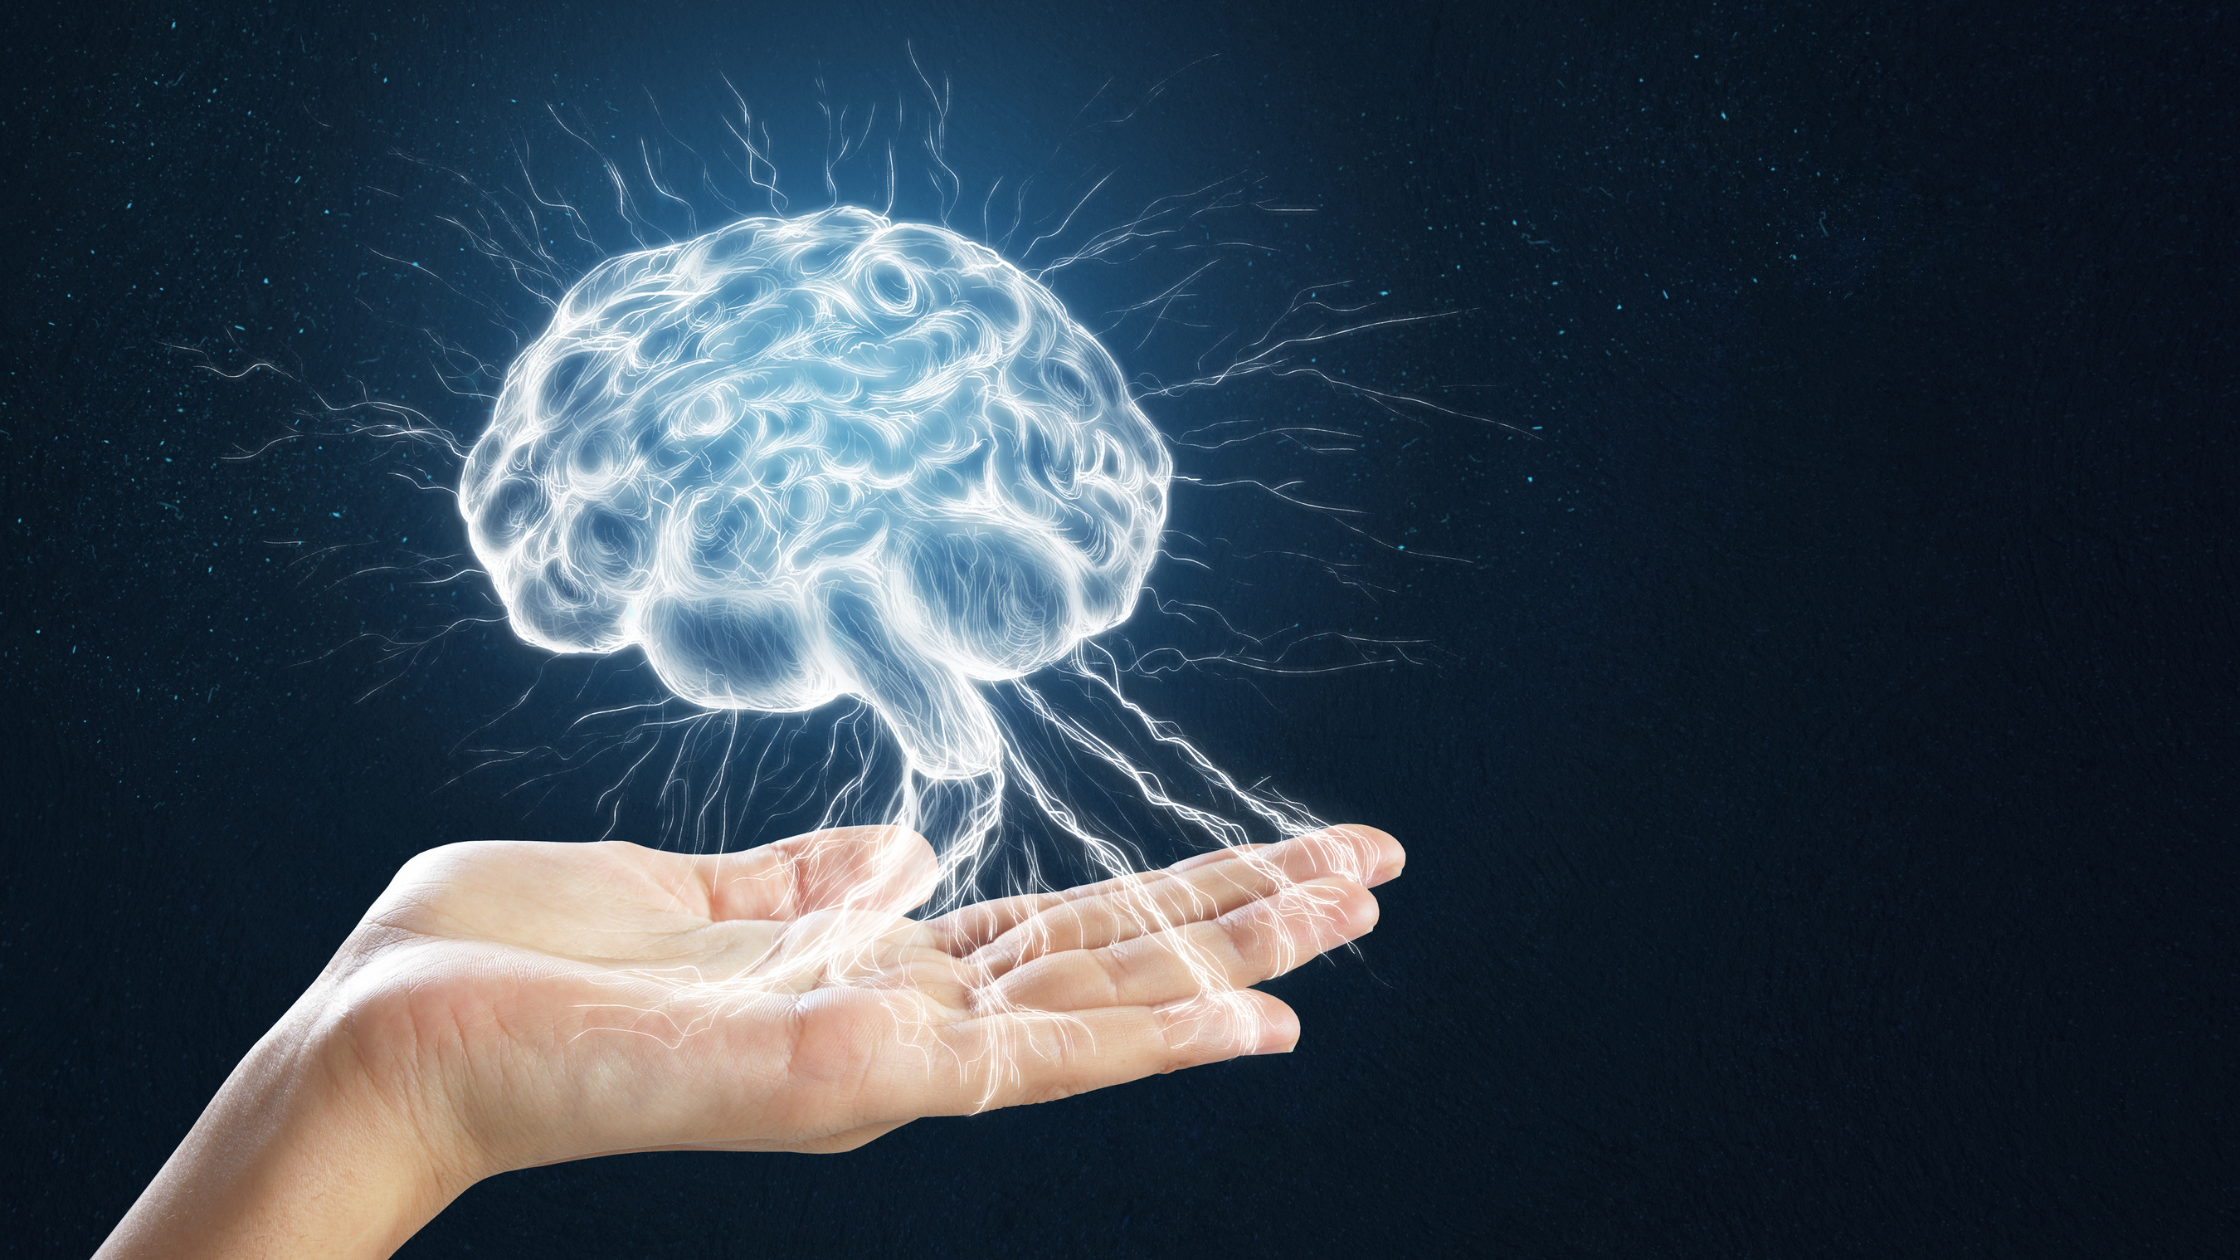 illustration of a glowing human brain floating over an open palm